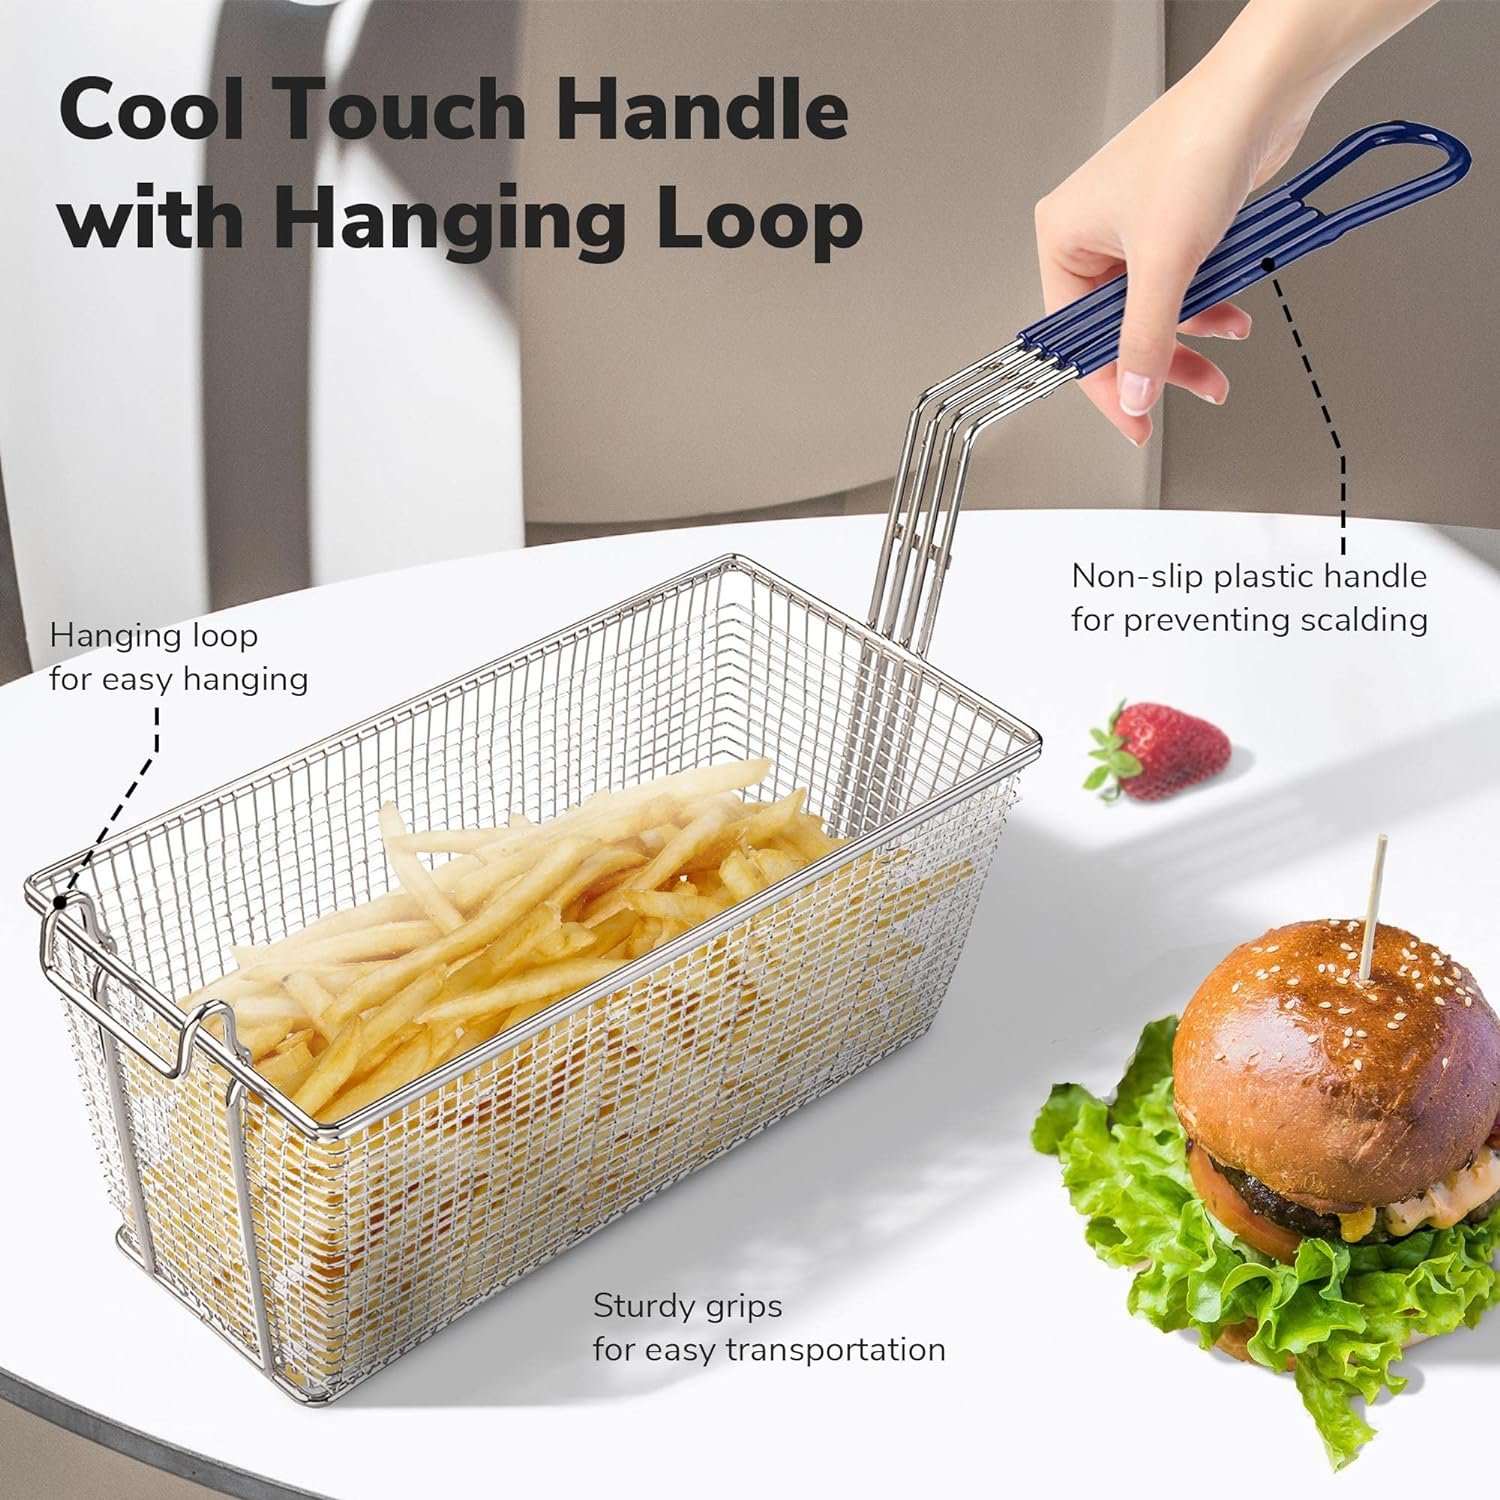 2PCS Deep Fryer Basket With Non-Slip Handle Heavy Duty Nickel Plated Iron Construction 13 1/4 x 6 1/2 x 6 Commercial Use